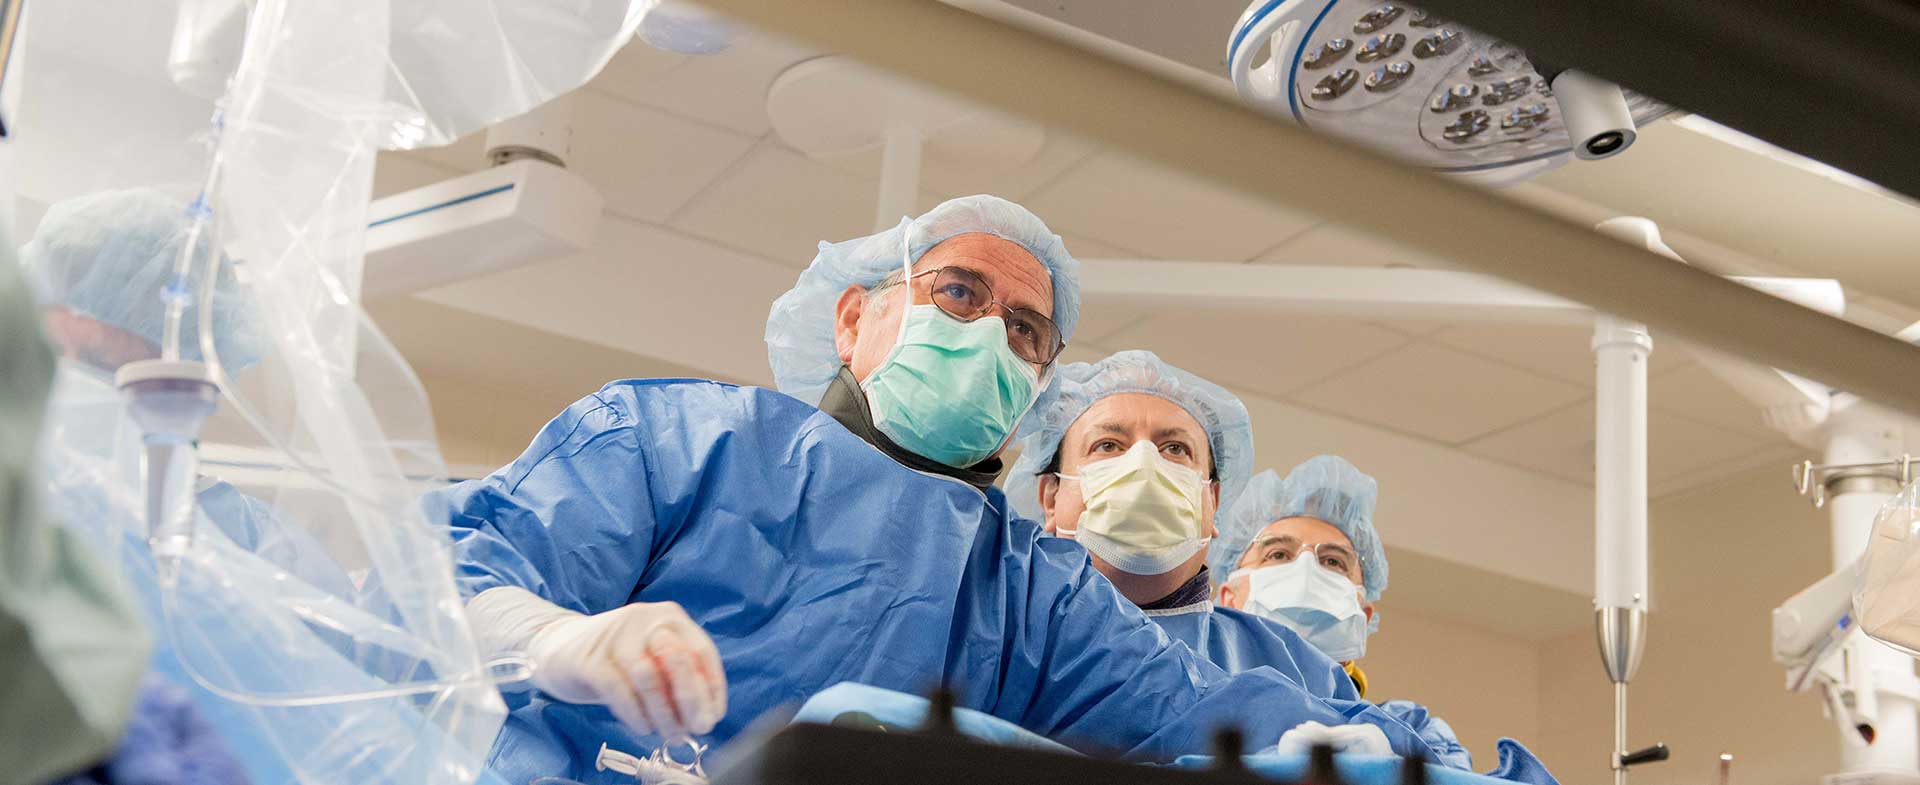 Dr. WIlliam O'Neill and team perform a transcatheter aortic valve replacement or TAVR